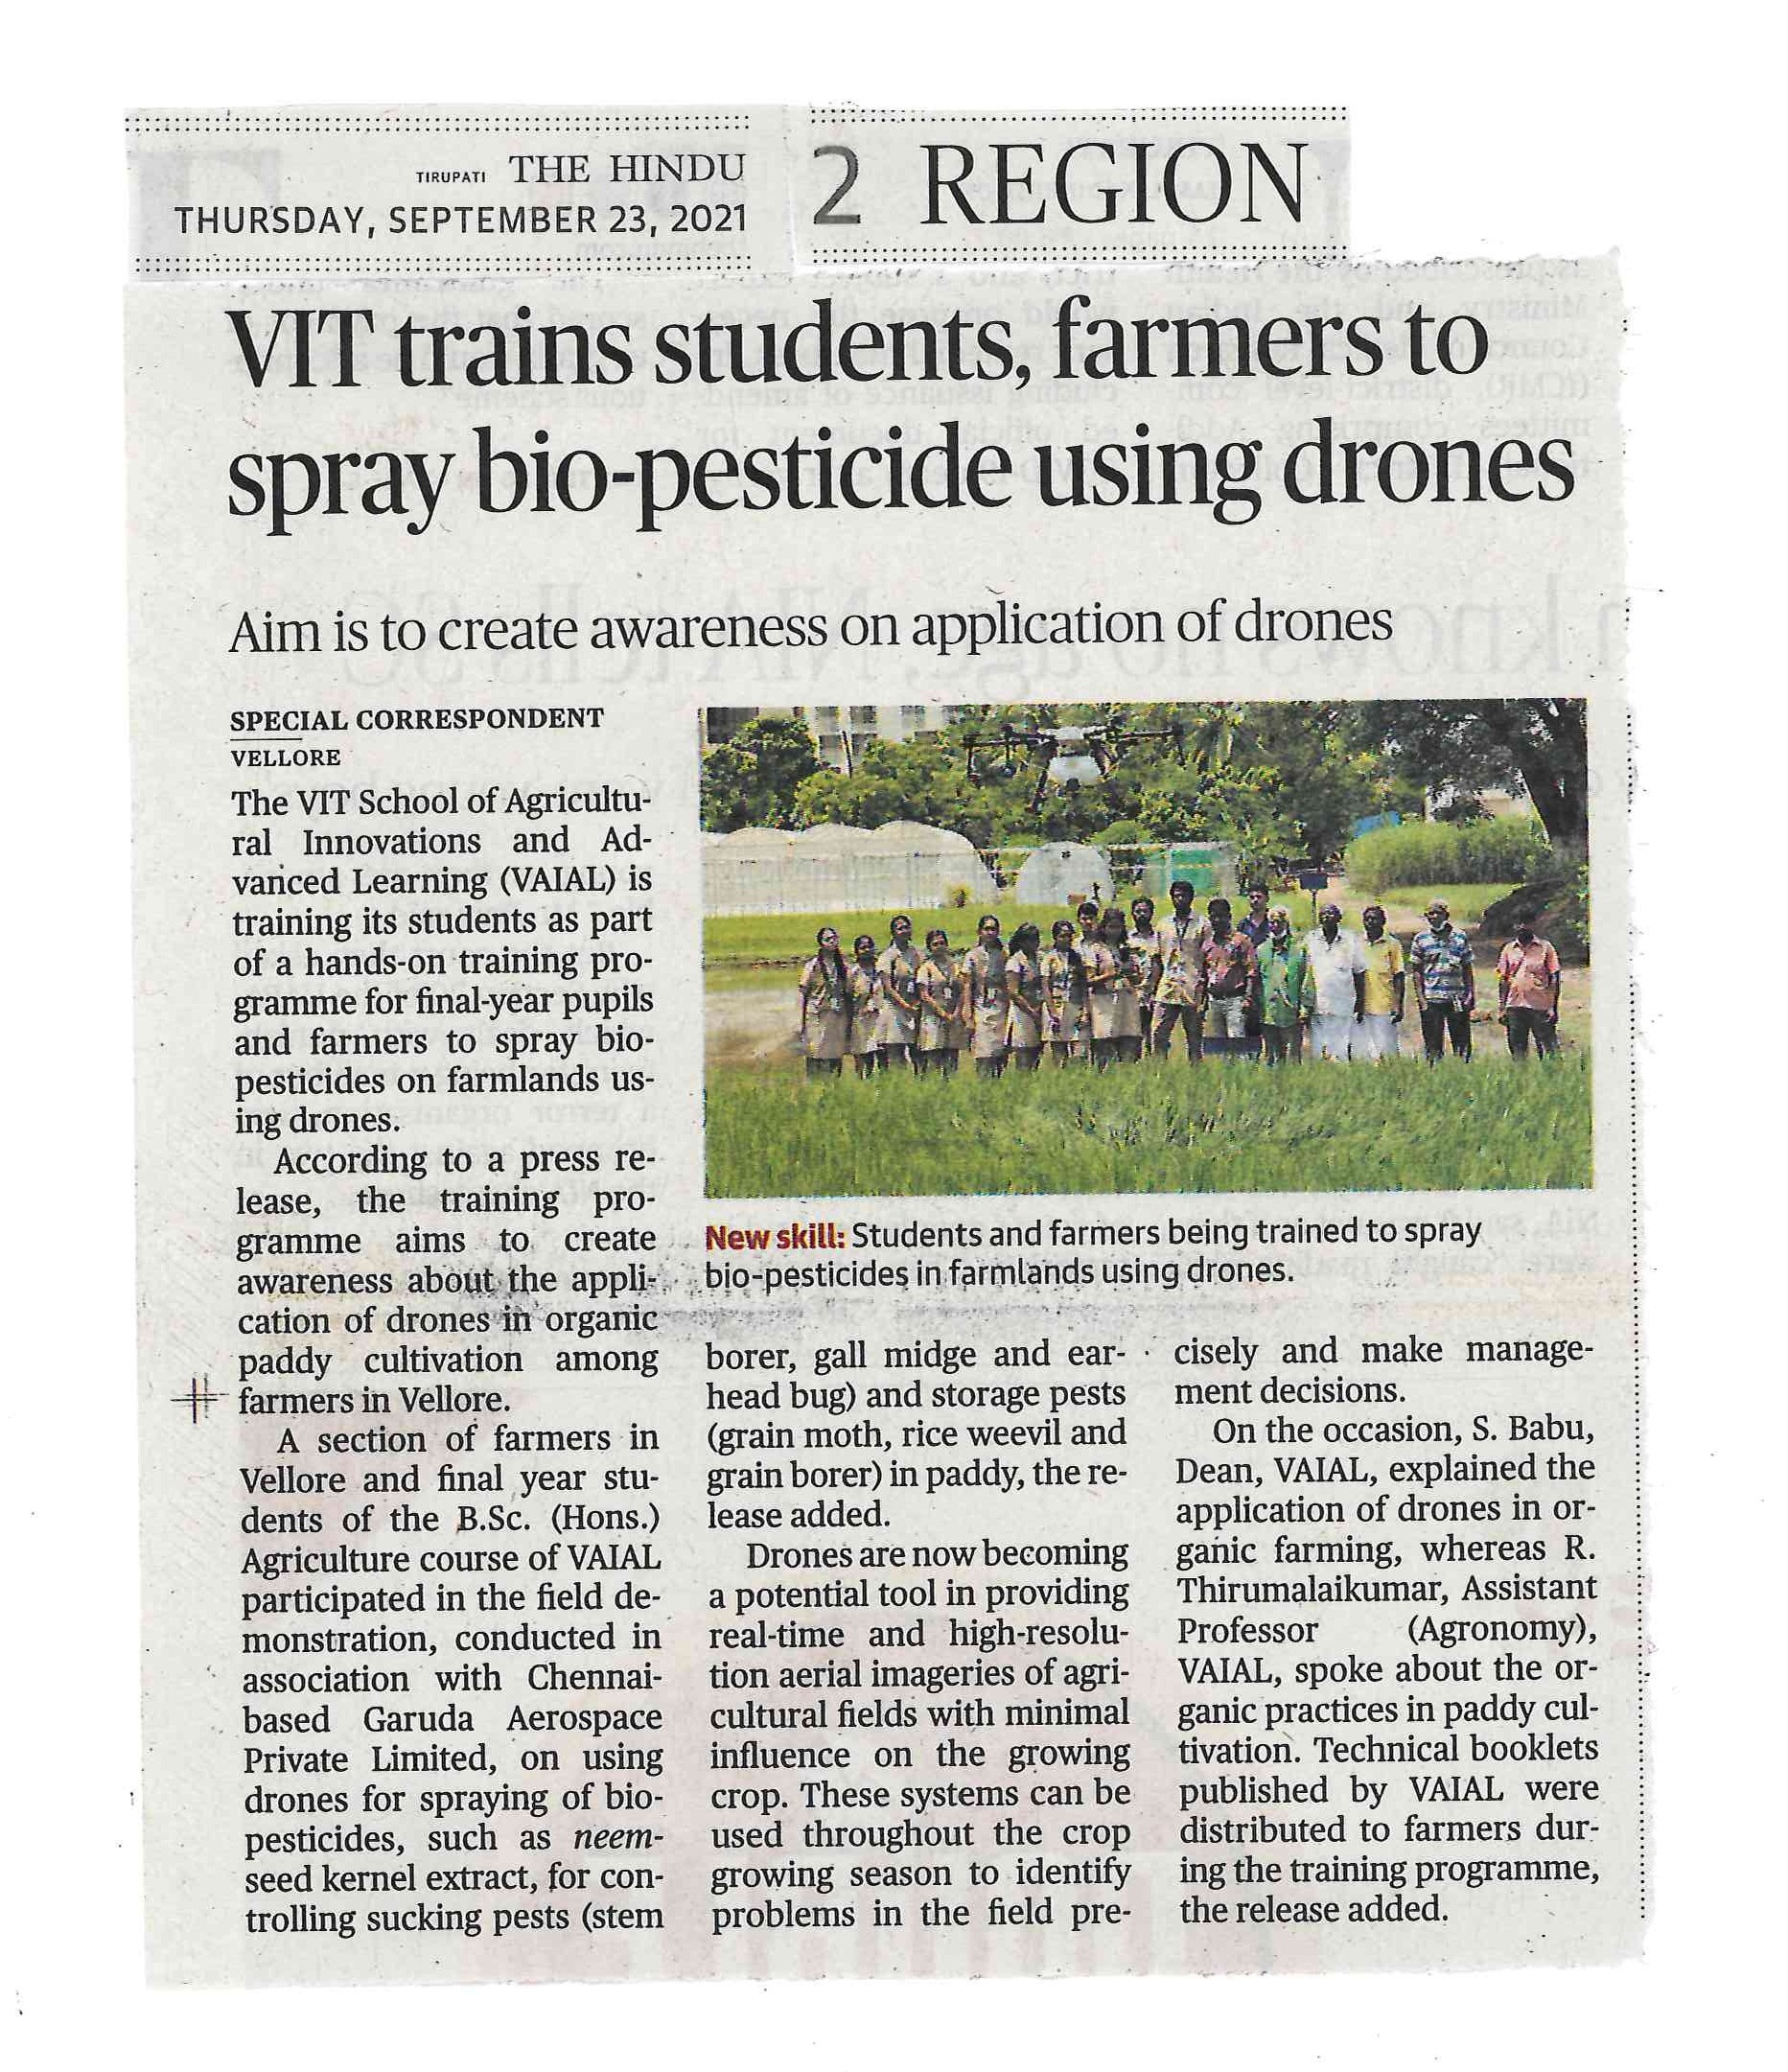 Agri(Vaial) imparts training for students about the use of Drones in organic farming